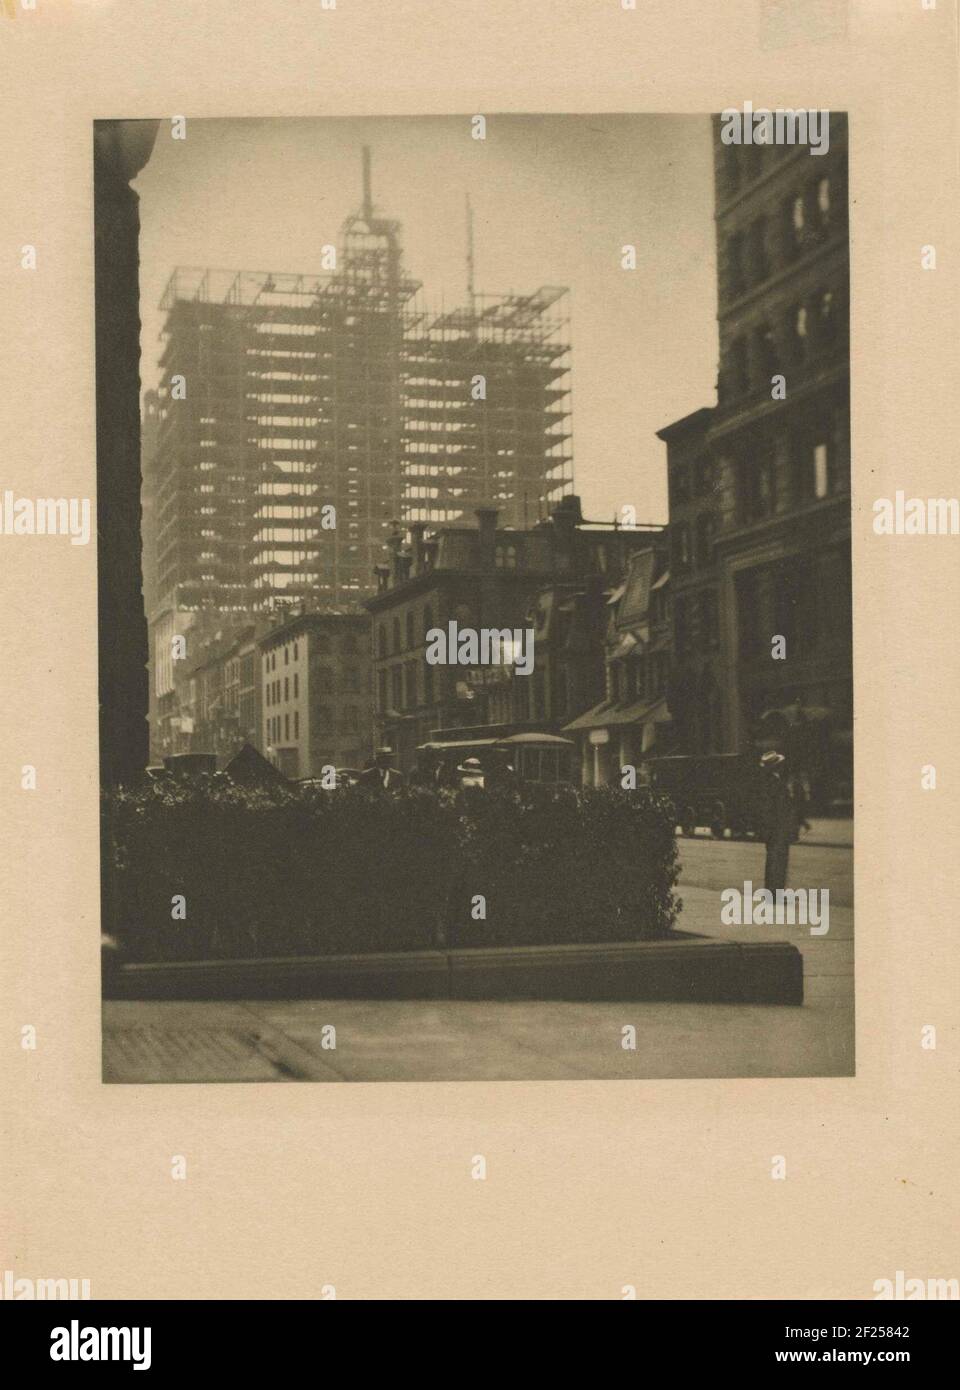 Old and New New York.For years Alfred Stieglitz strove tirelessly to gain  recognition for photography as an art form. Between 1903 and 1917 he  published the magazine Camera Work, in which he